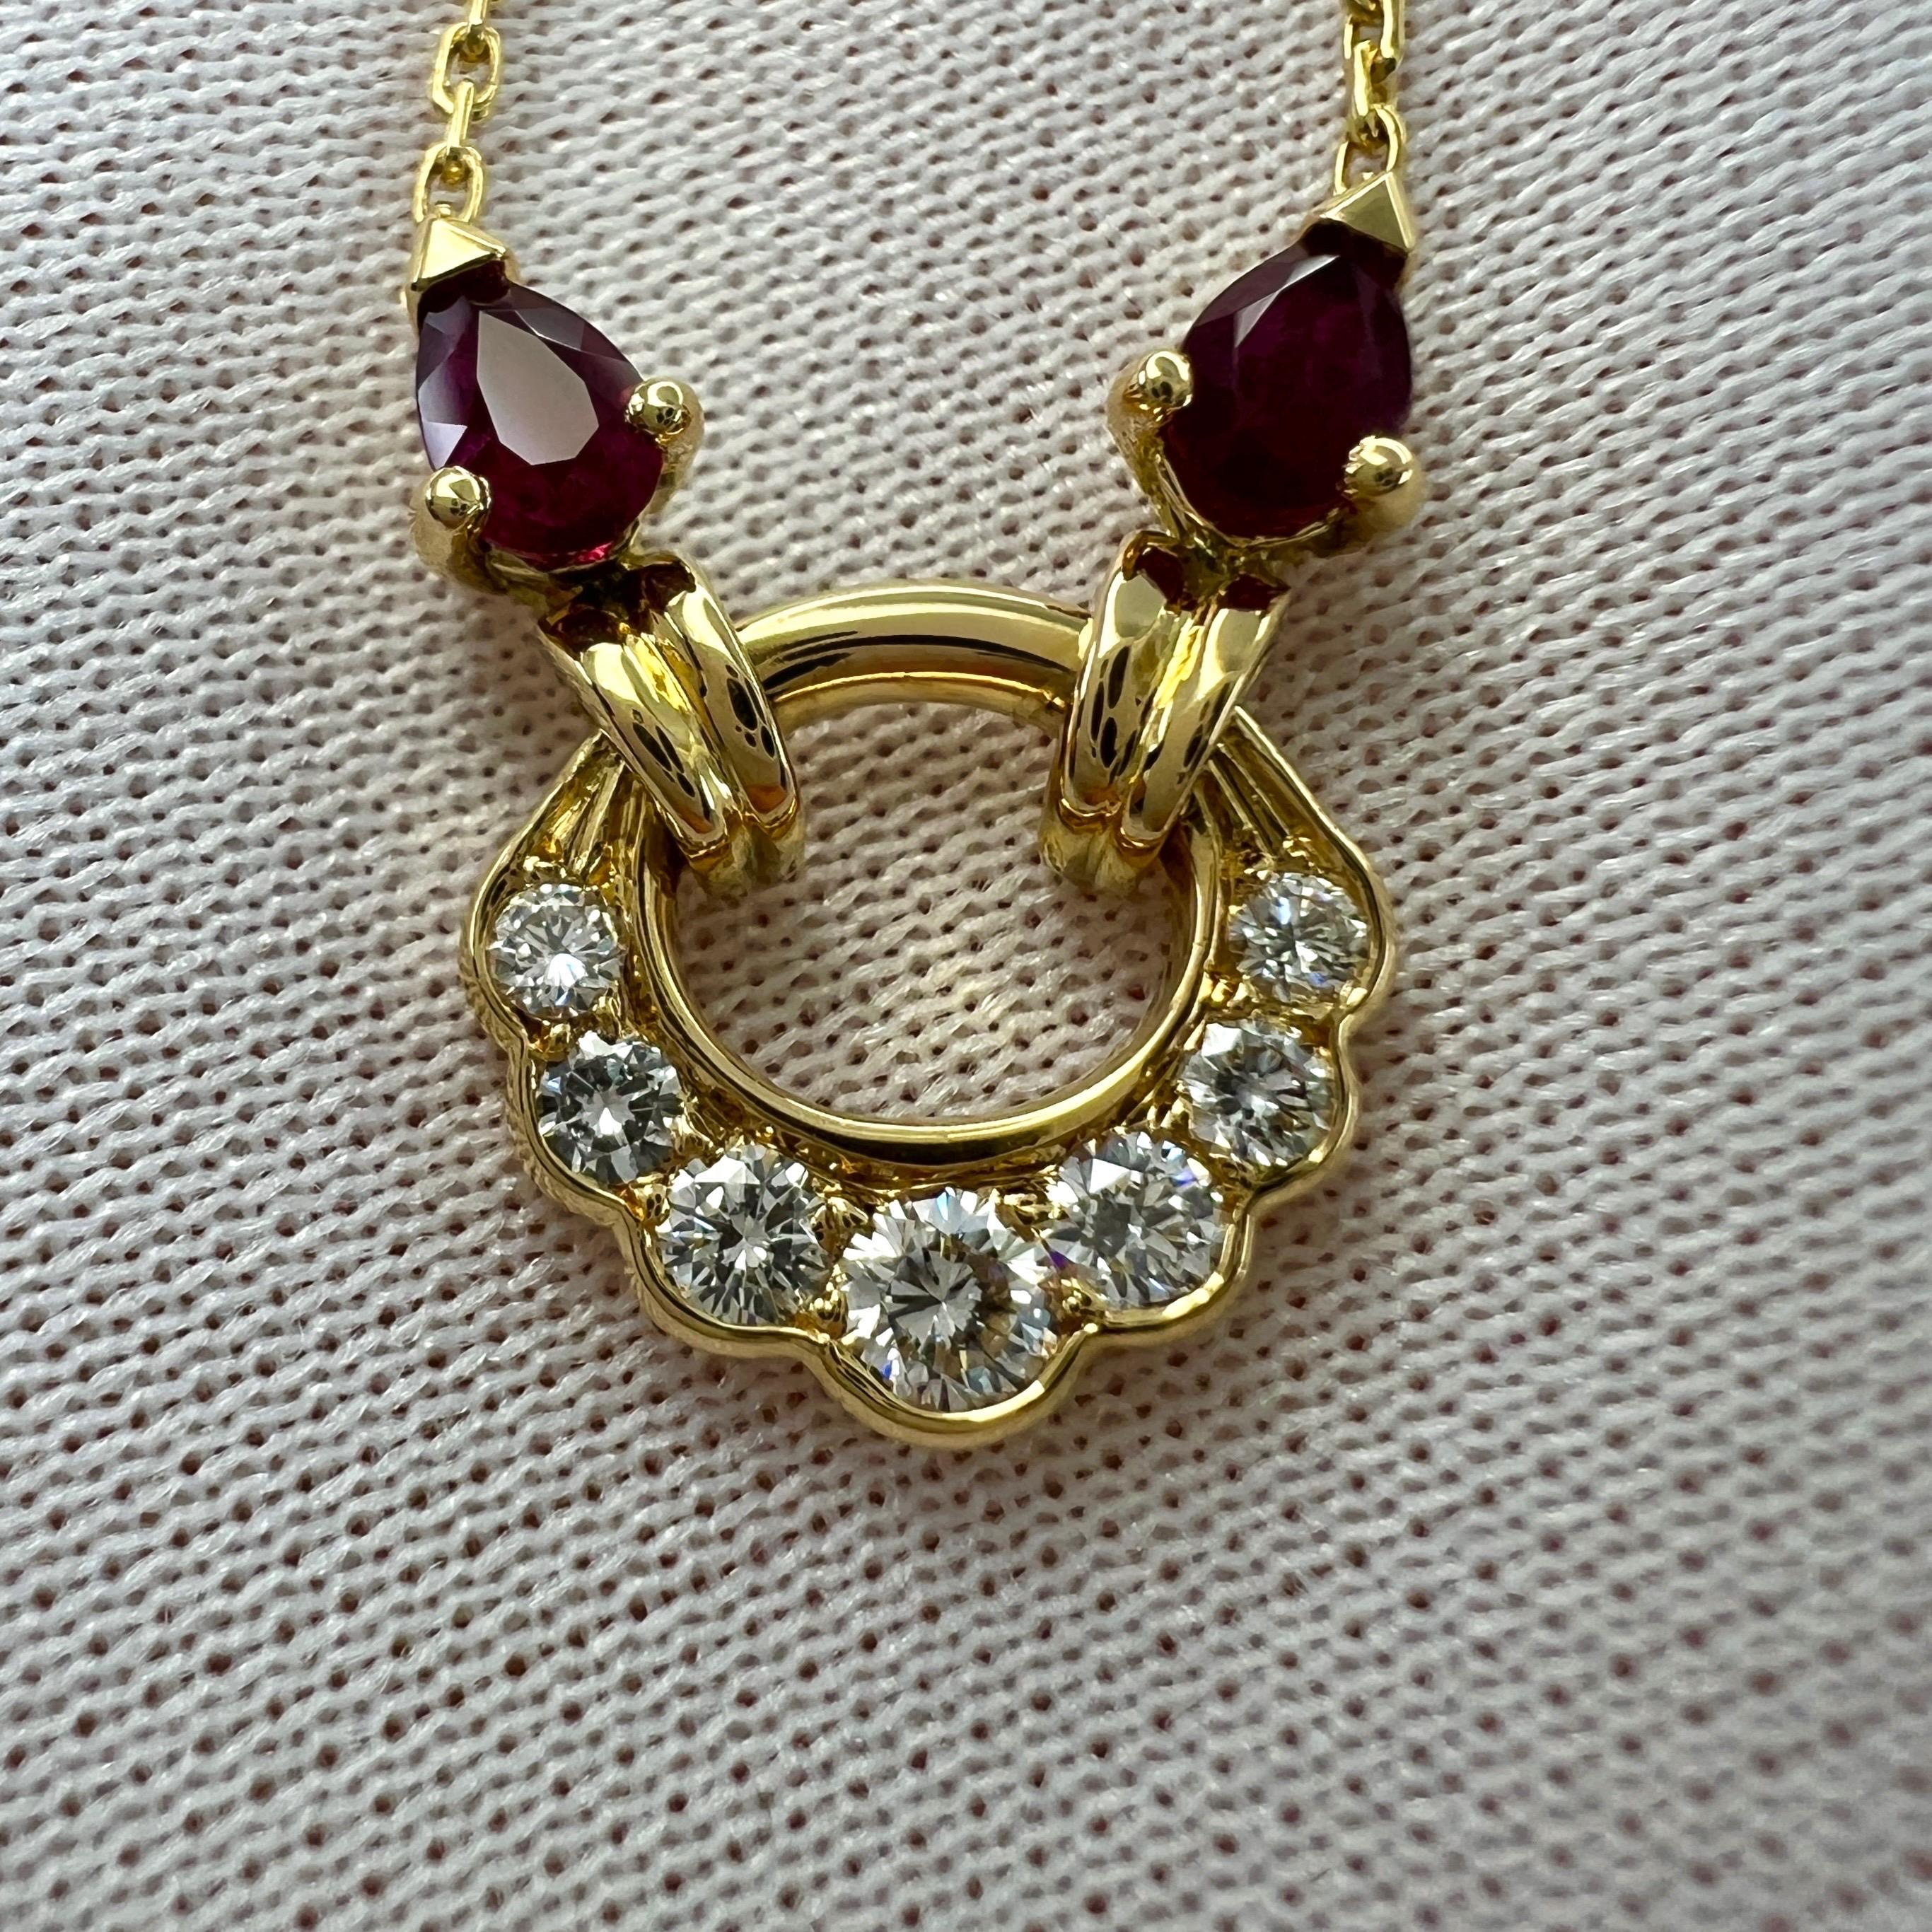 Rare Vintage Van Cleef & Arpels Ruby Diamond 18k Yellow Gold Pendant Necklace In Excellent Condition For Sale In Birmingham, GB